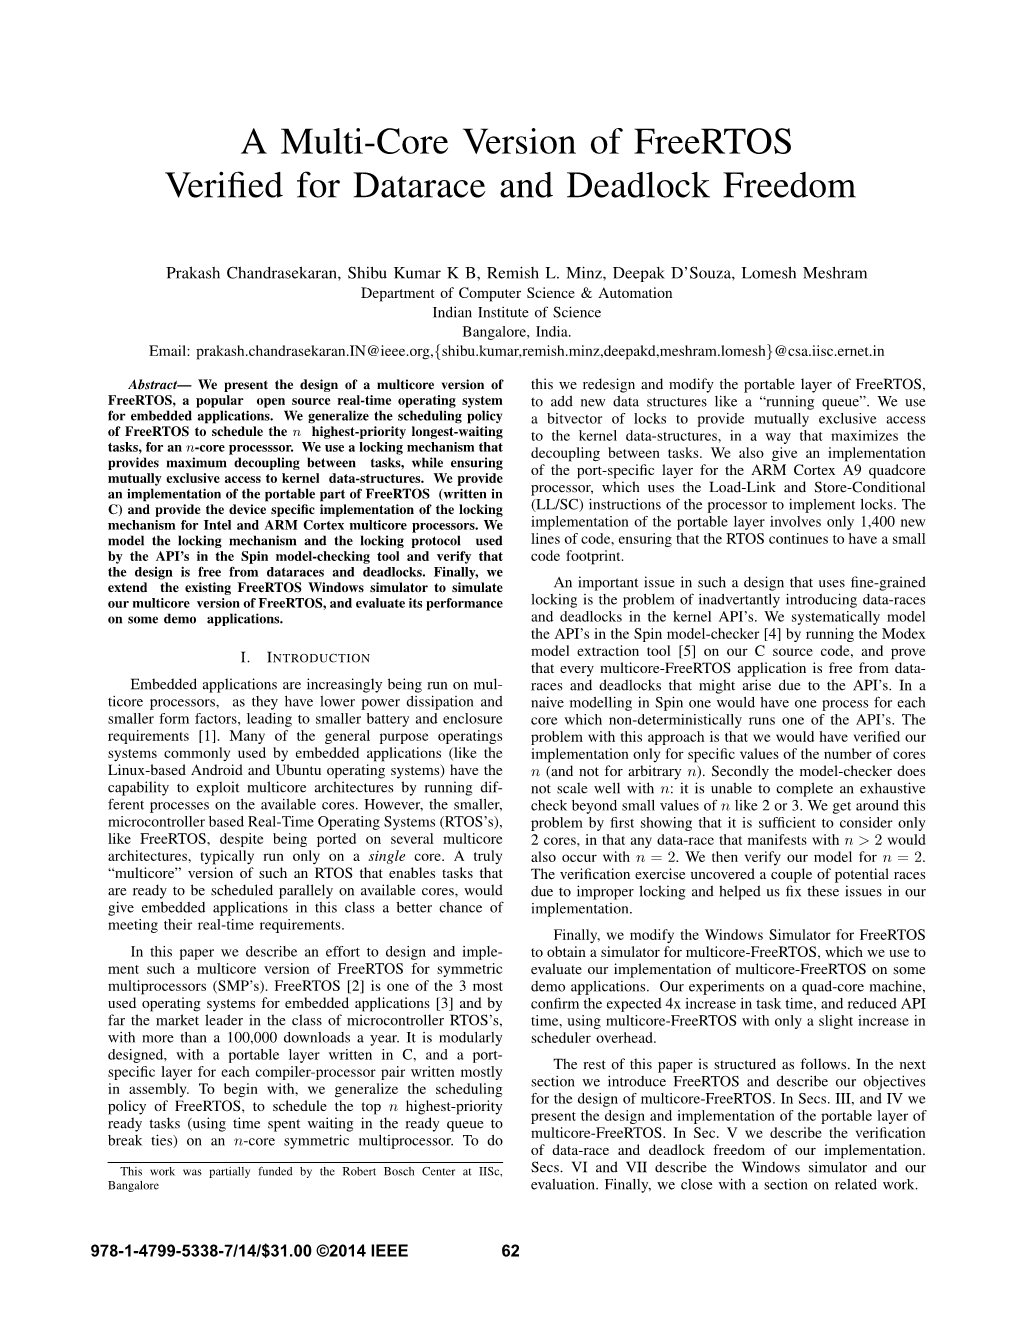 A Multi-Core Version of Freertos Verified for Datarace and Deadlock